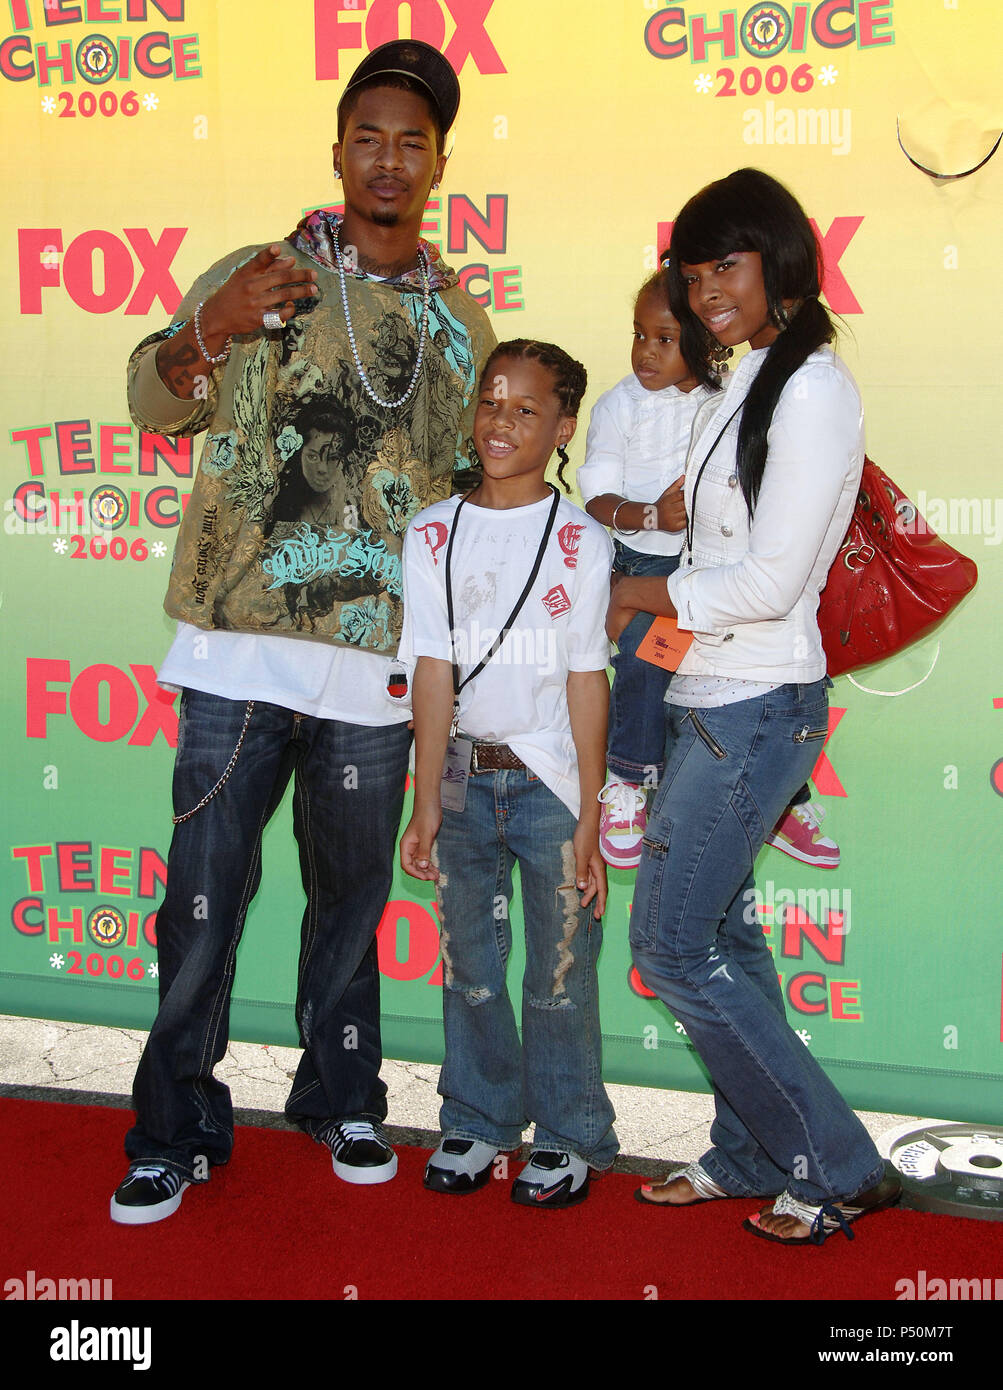 Chingy with wife and kids at the TEEN CHOICE Awards at the Universal Amphitheatre  in Los Angeles. August 20, 2006.  full length eye contact family          -            Chingy family012.jpgChingy family012  Event in Hollywood Life - California, Red Carpet Event, USA, Film Industry, Celebrities, Photography, Bestof, Arts Culture and Entertainment, Topix Celebrities fashion, Best of, Hollywood Life, Event in Hollywood Life - California,  backstage trophy, Awards show, movie celebrities, TV celebrities, Music celebrities, Topix, Bestof, Arts Culture and Entertainment, Photography,    inquiry tsu Stock Photo